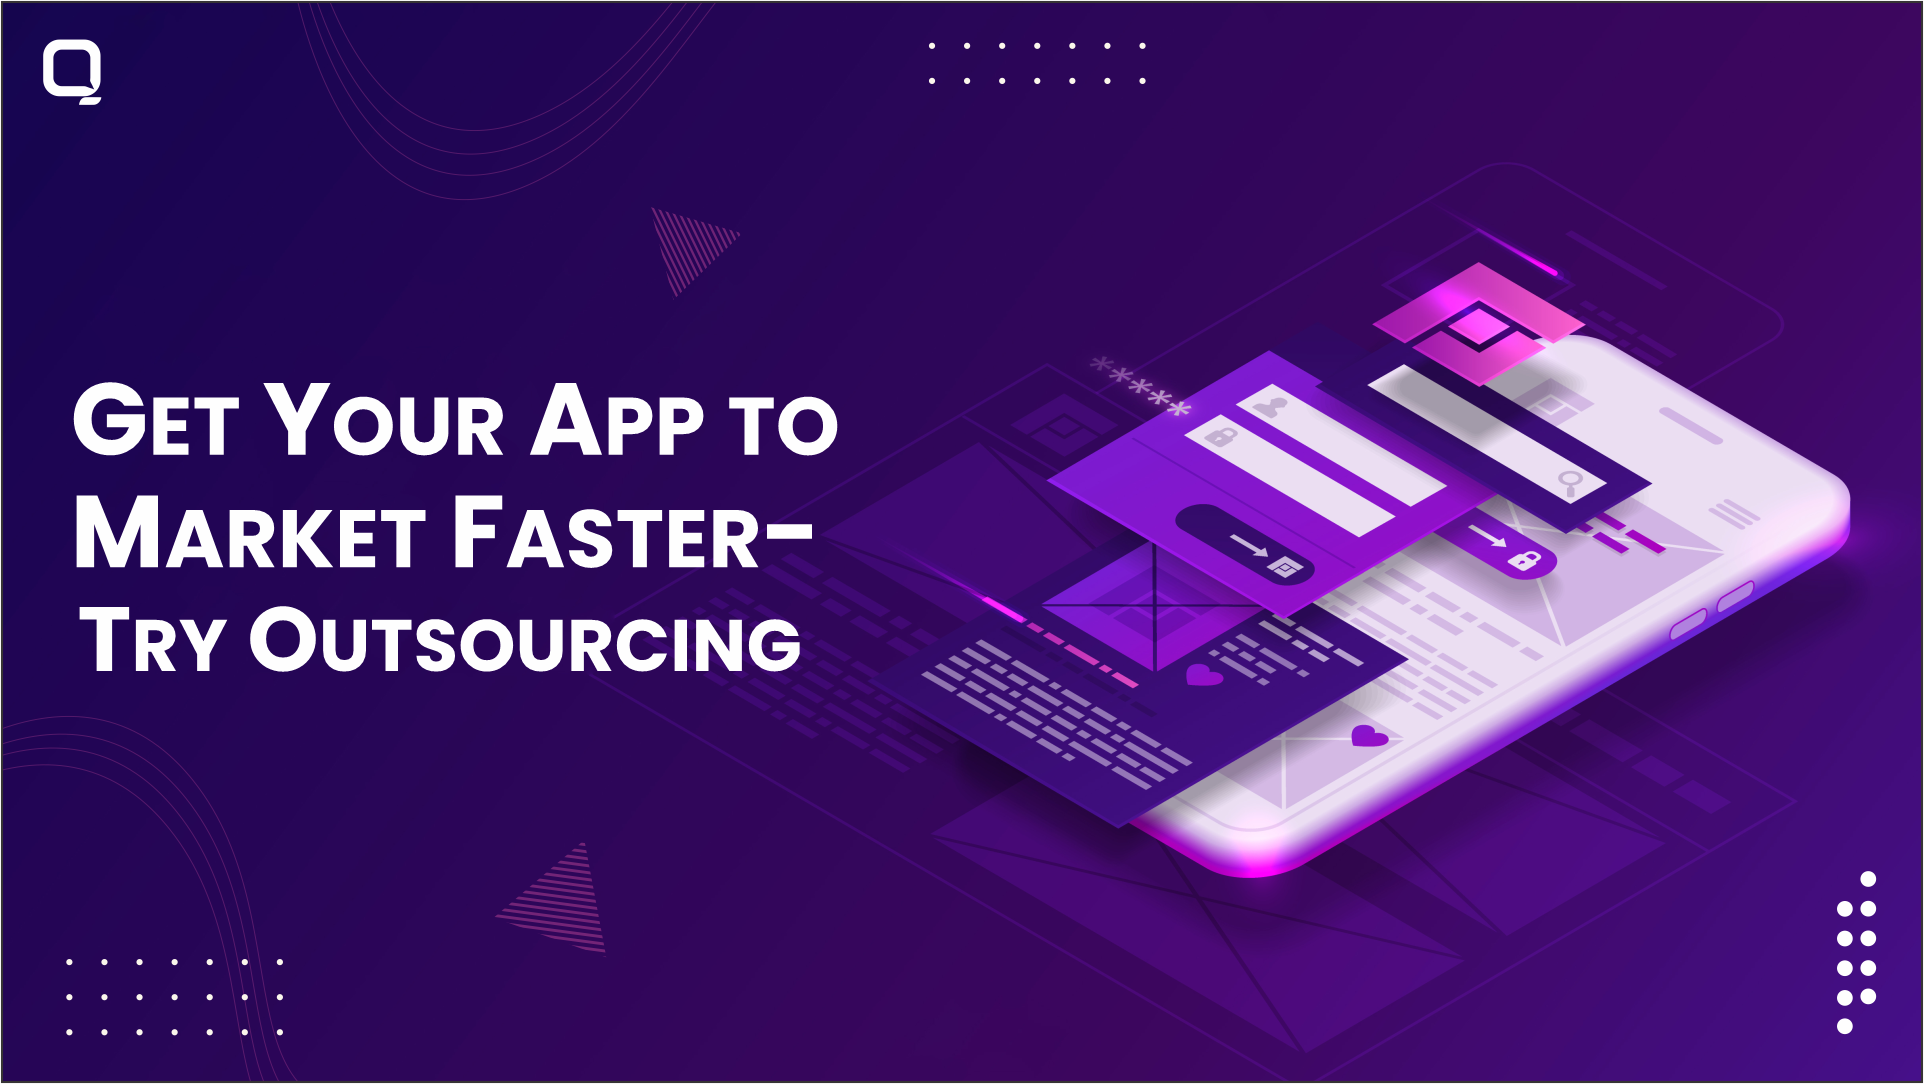 Why Startups Should Go for Mobile App Development Outsourcing?